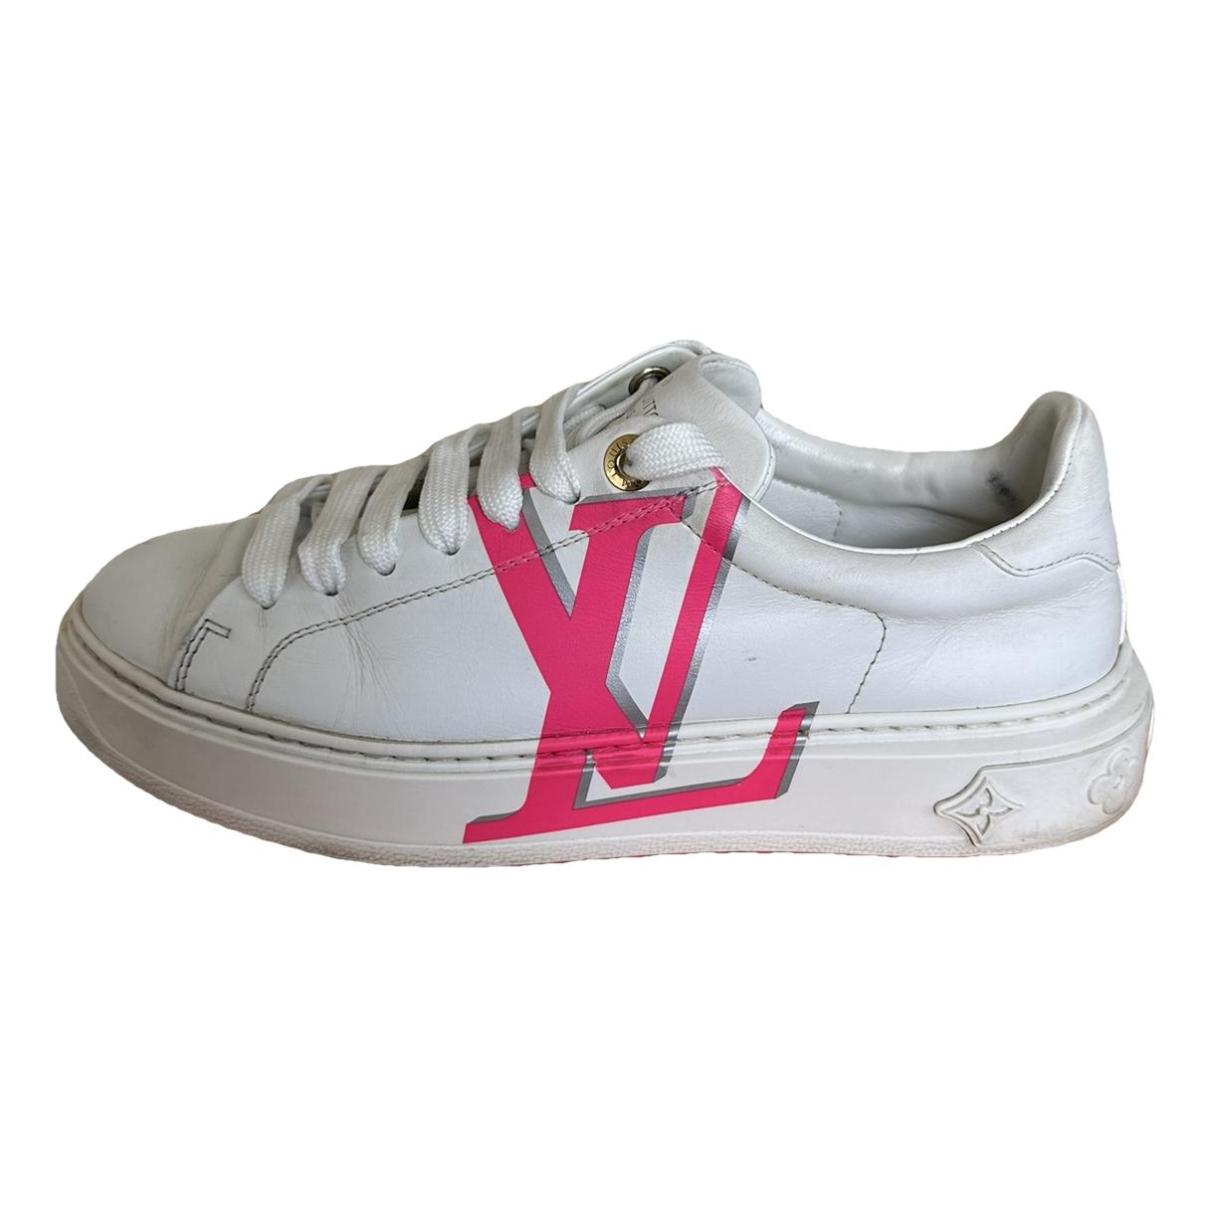 Time out leather trainers Louis Vuitton White size 38.5 EU in Leather -  34685270